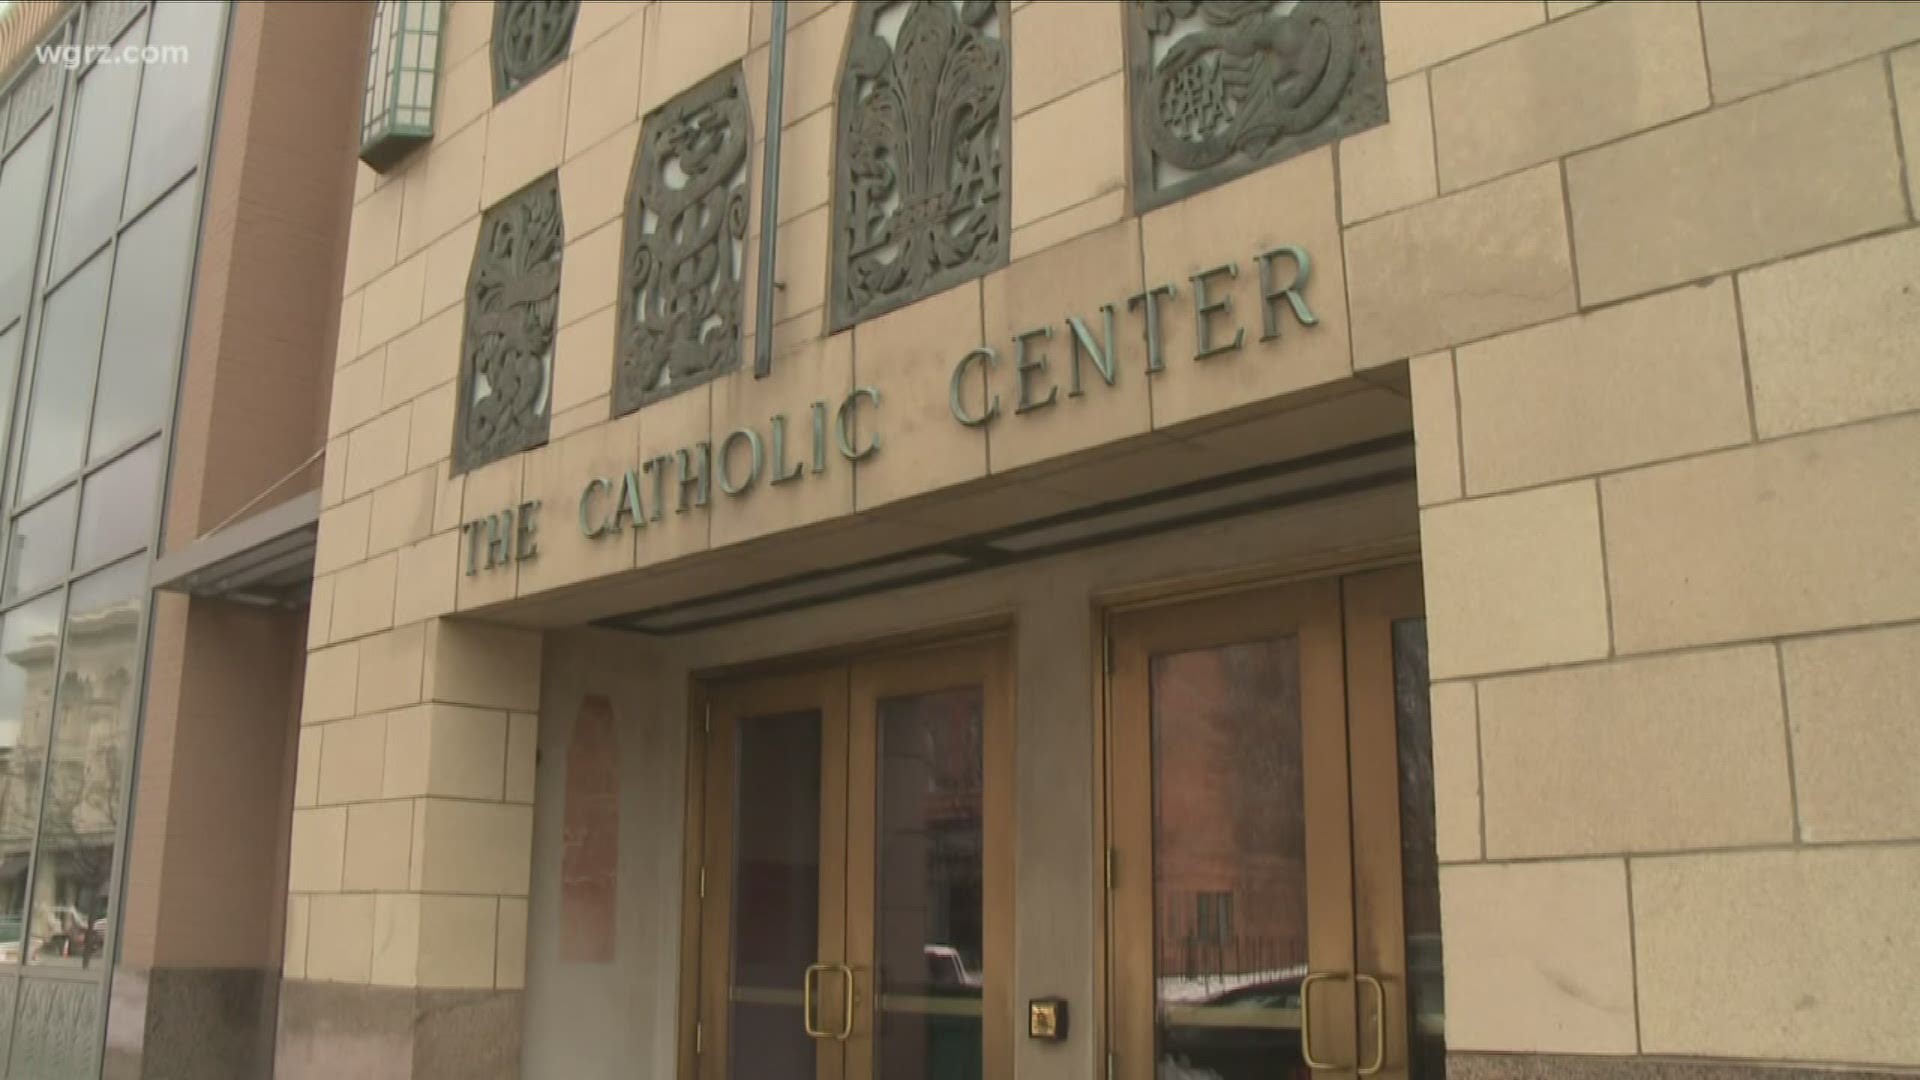 Sources within the Diocese tell 2 On Your Side that credit cards connected to the diocese will be shut down as of two in the afternoon tomorrow.